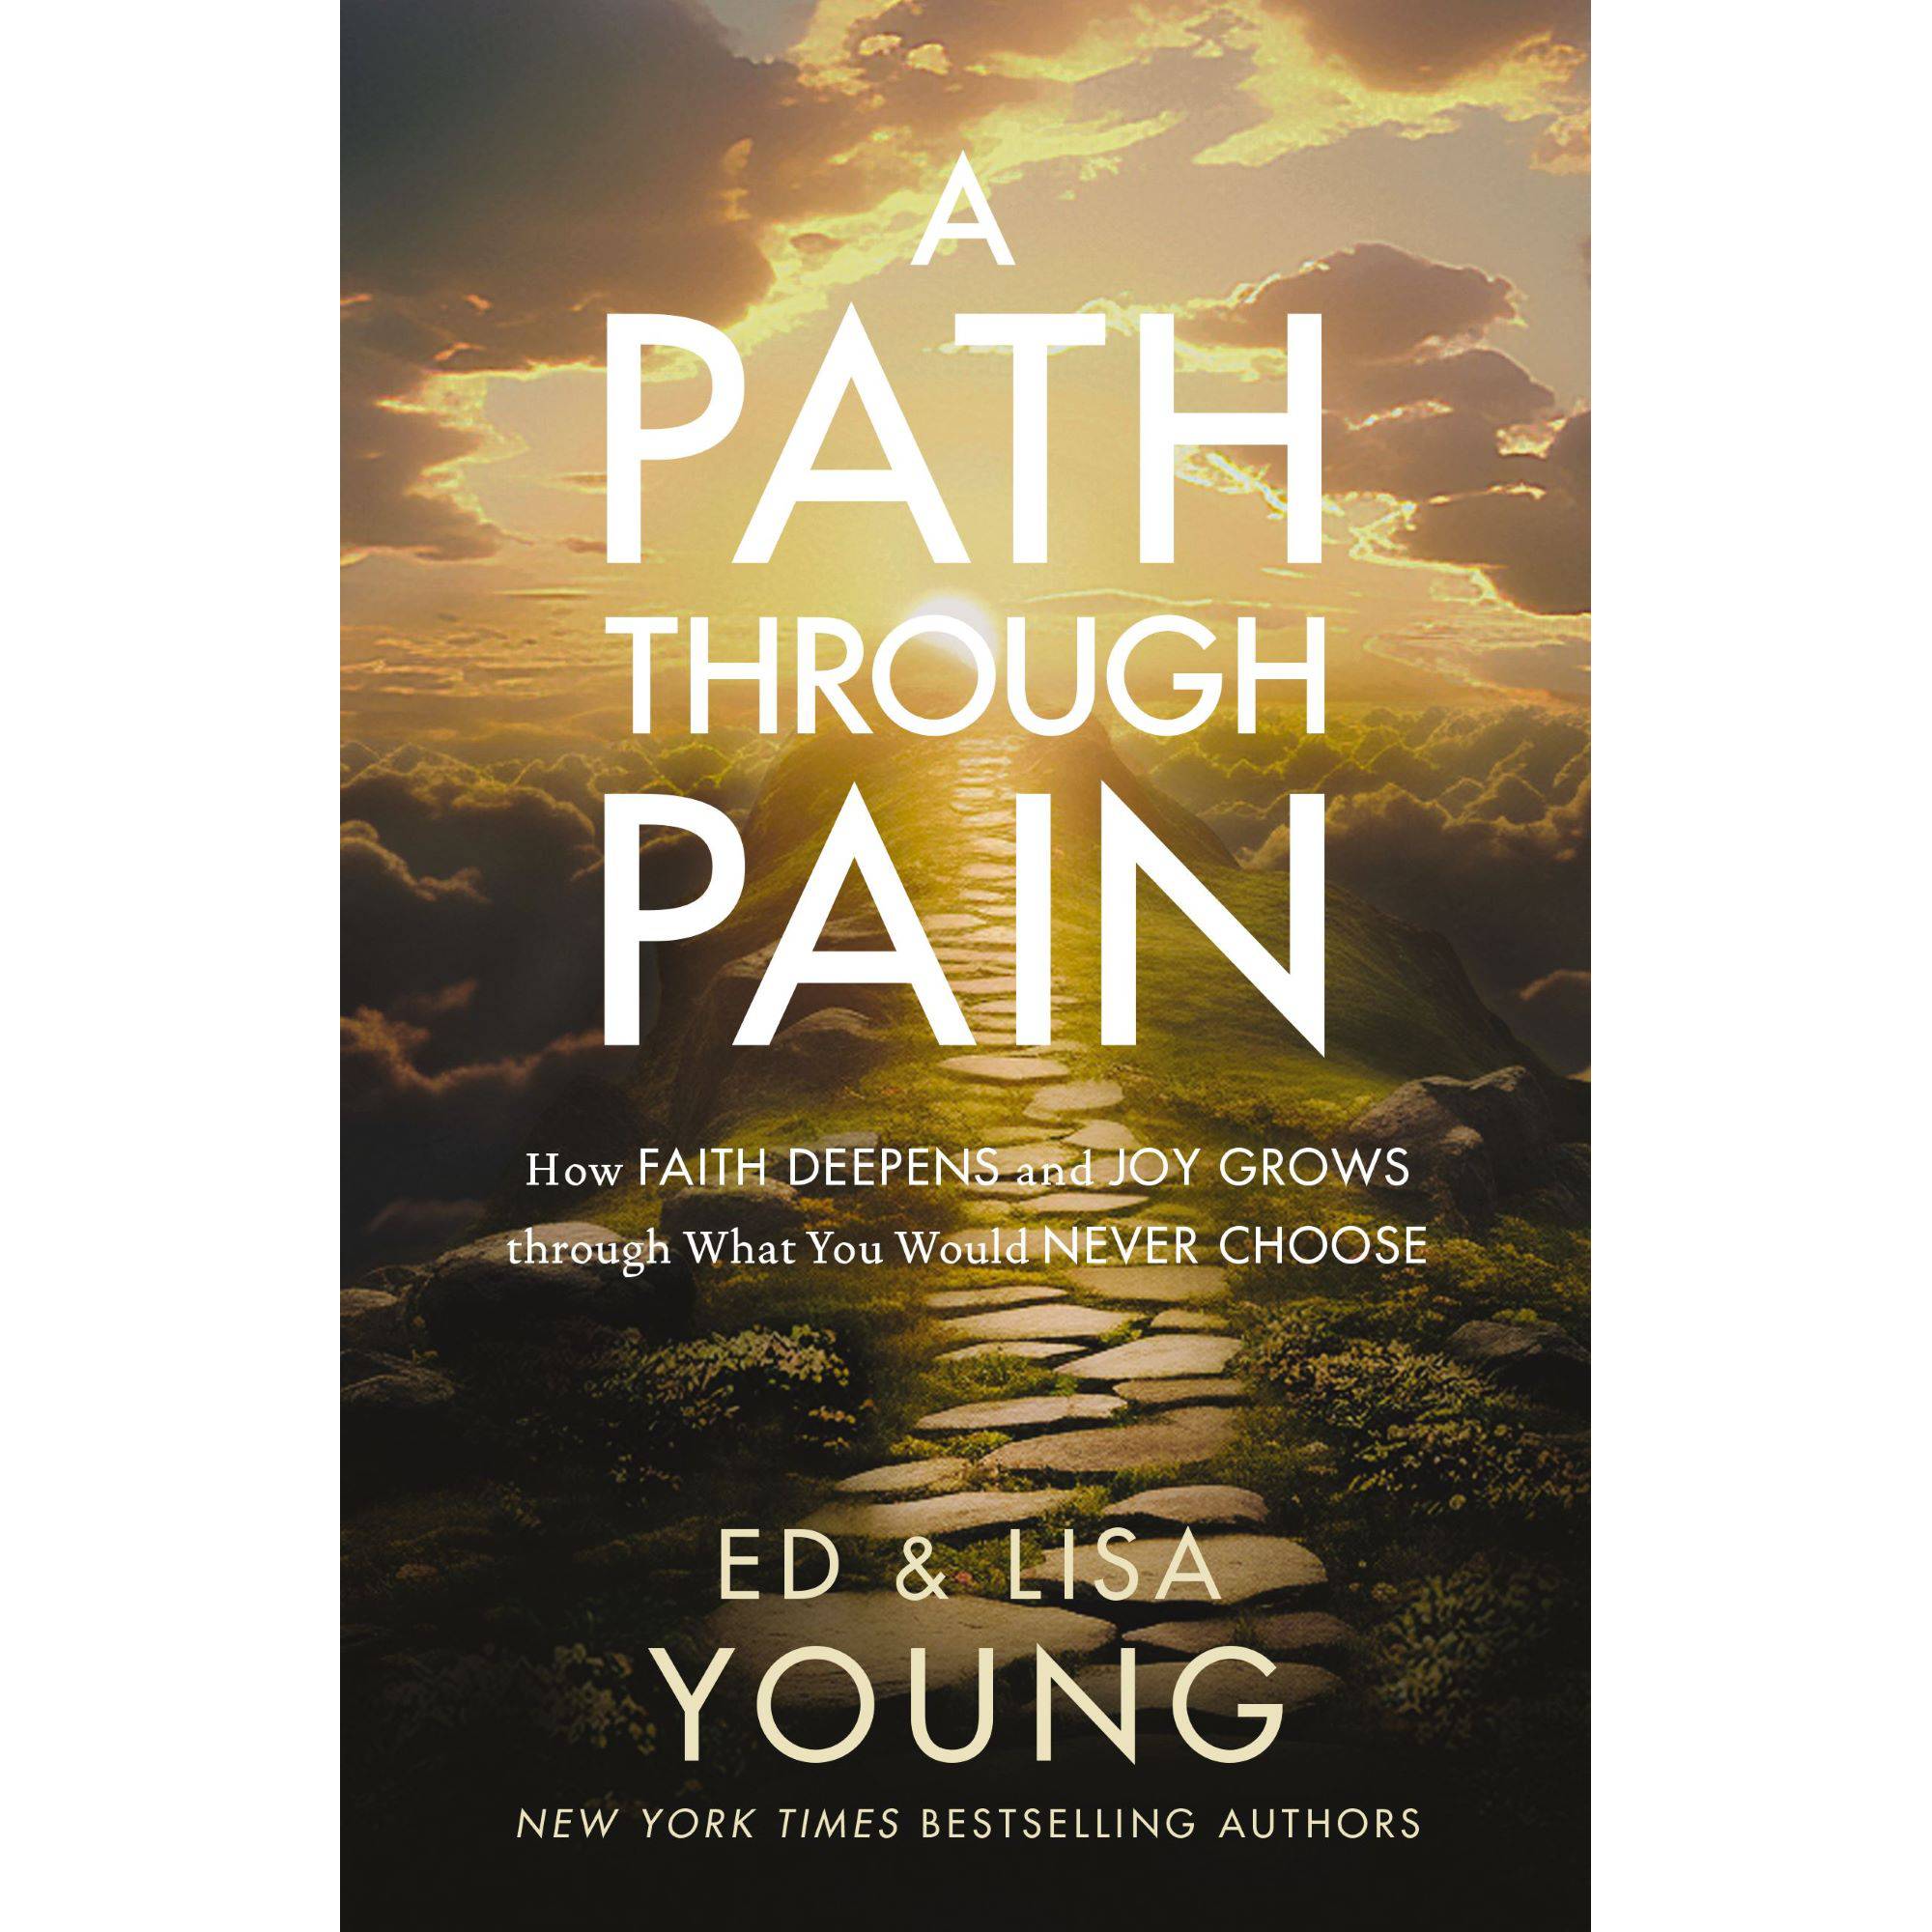 Playing Through the Pain (Paperback)